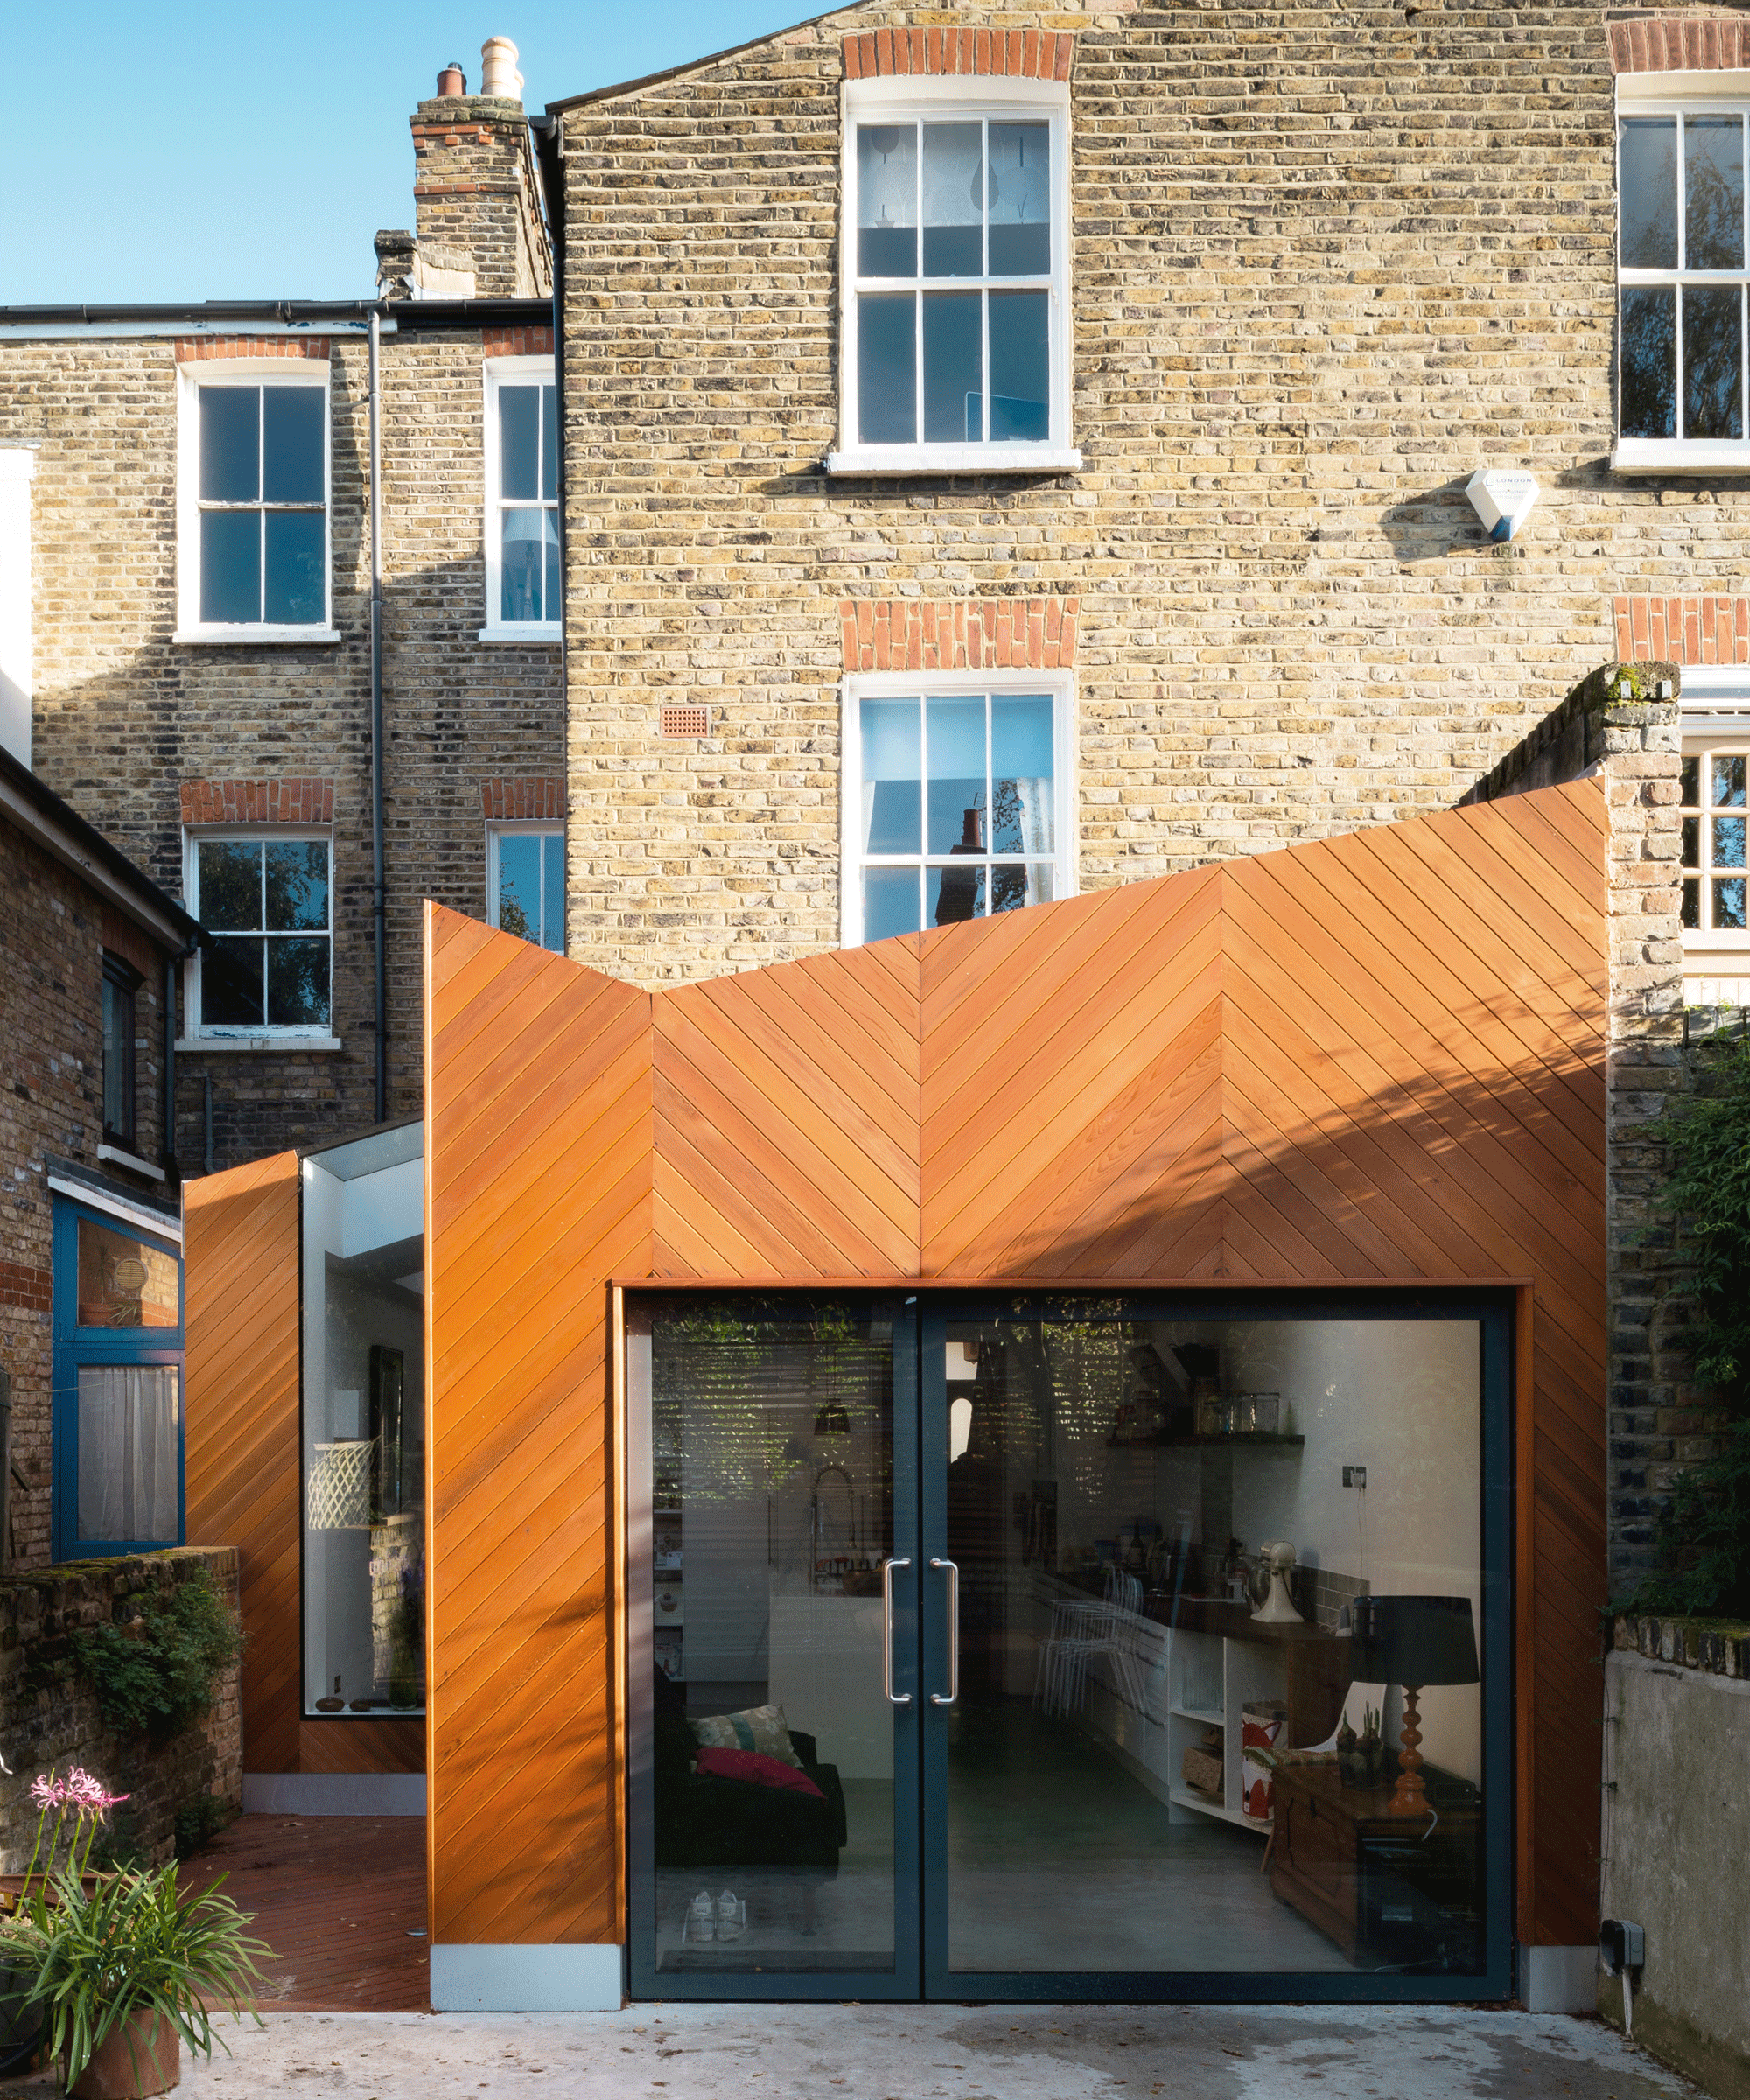 The rear exterior view of a kitchen extension clad in wood